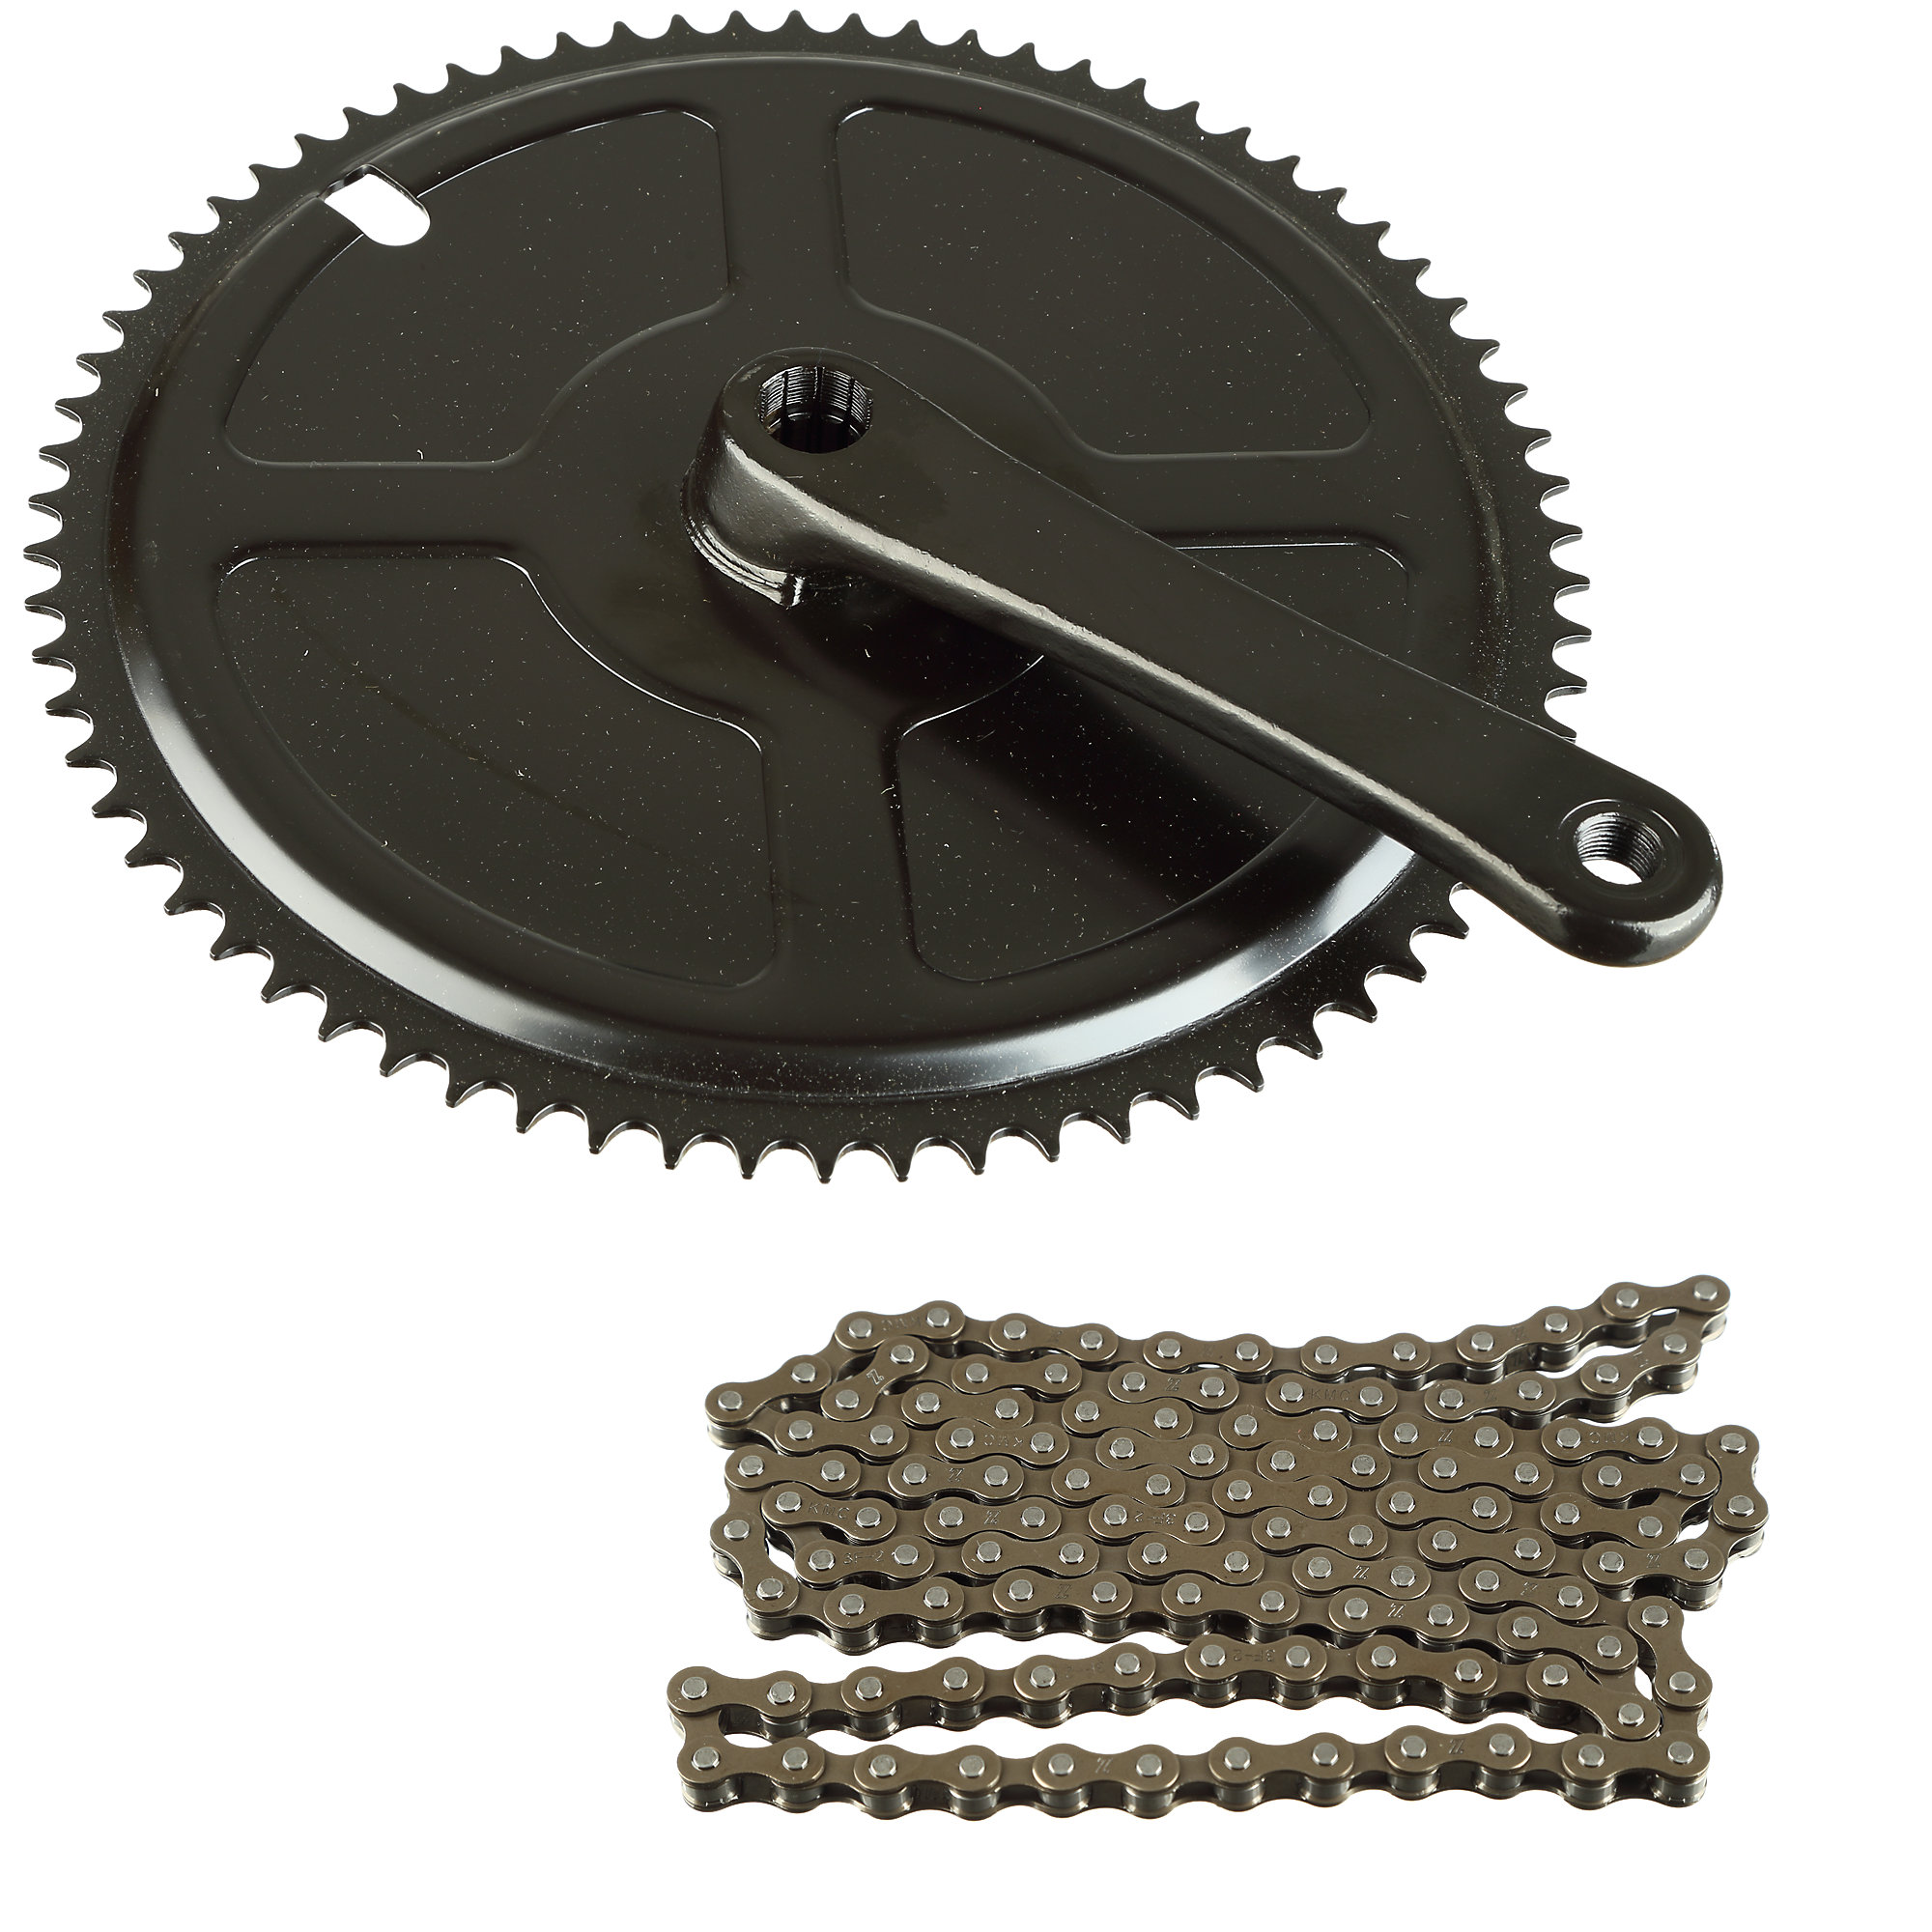 1/8" Chain and ISIS Right Crank Arm Kit